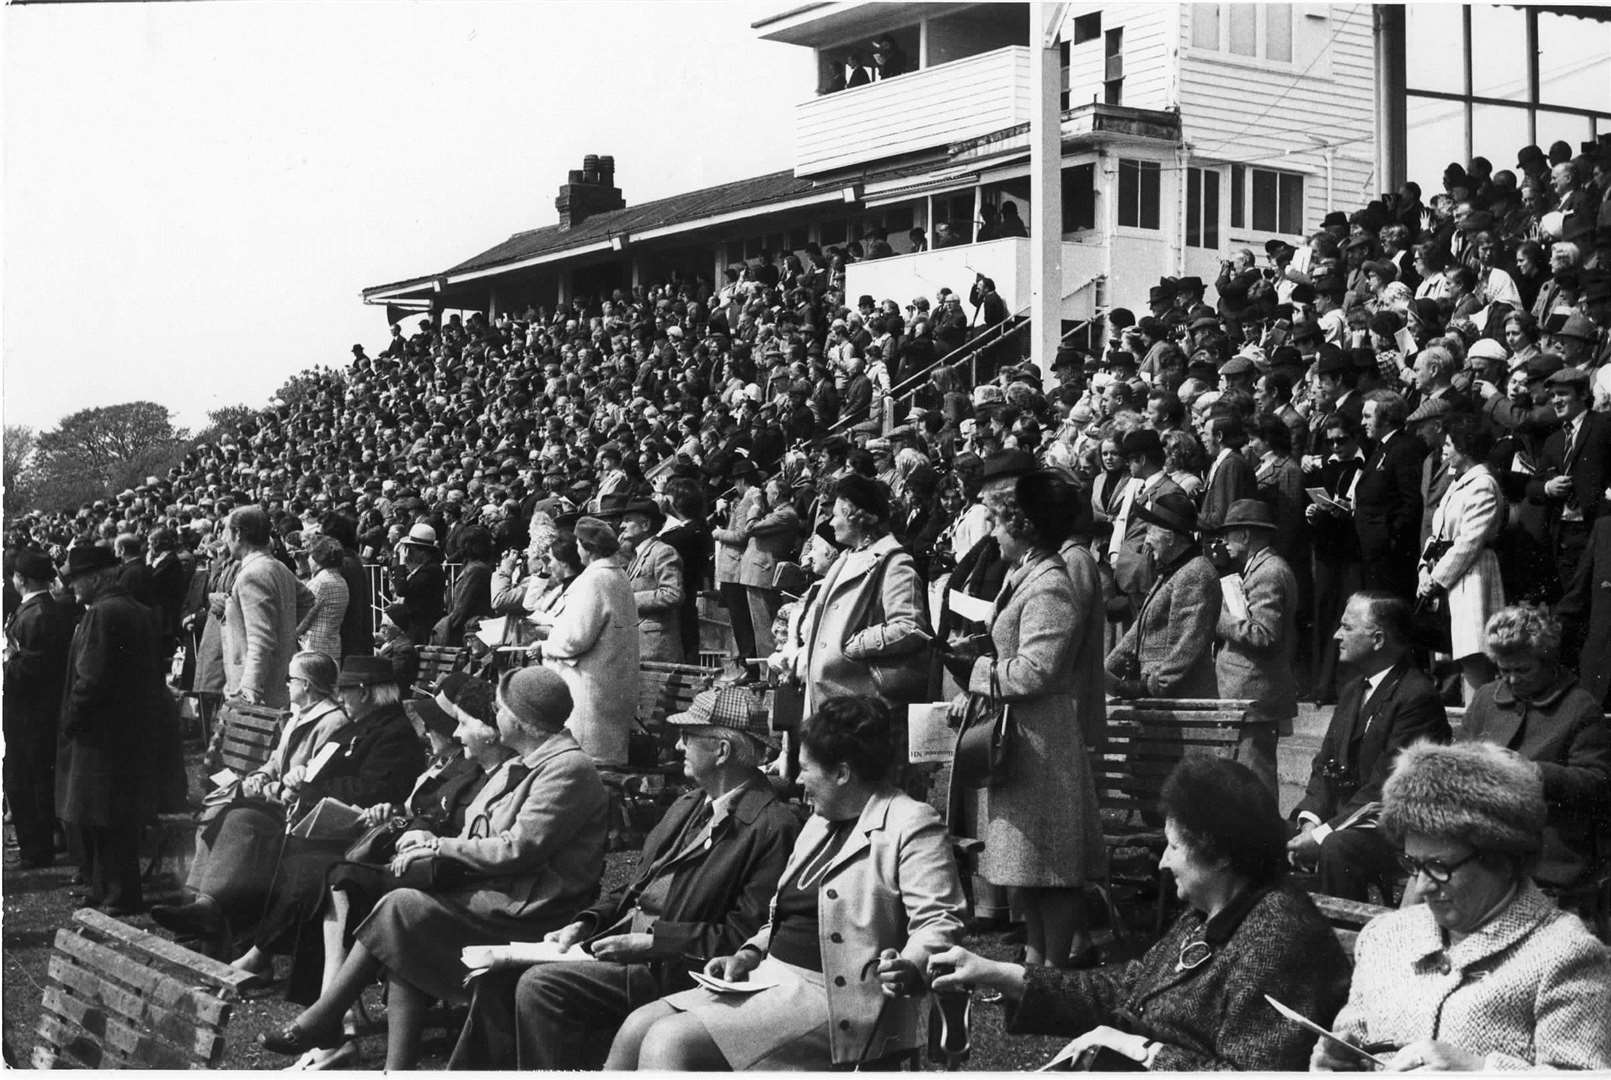 Folkestone Racecourse packed to the rafters back in the day